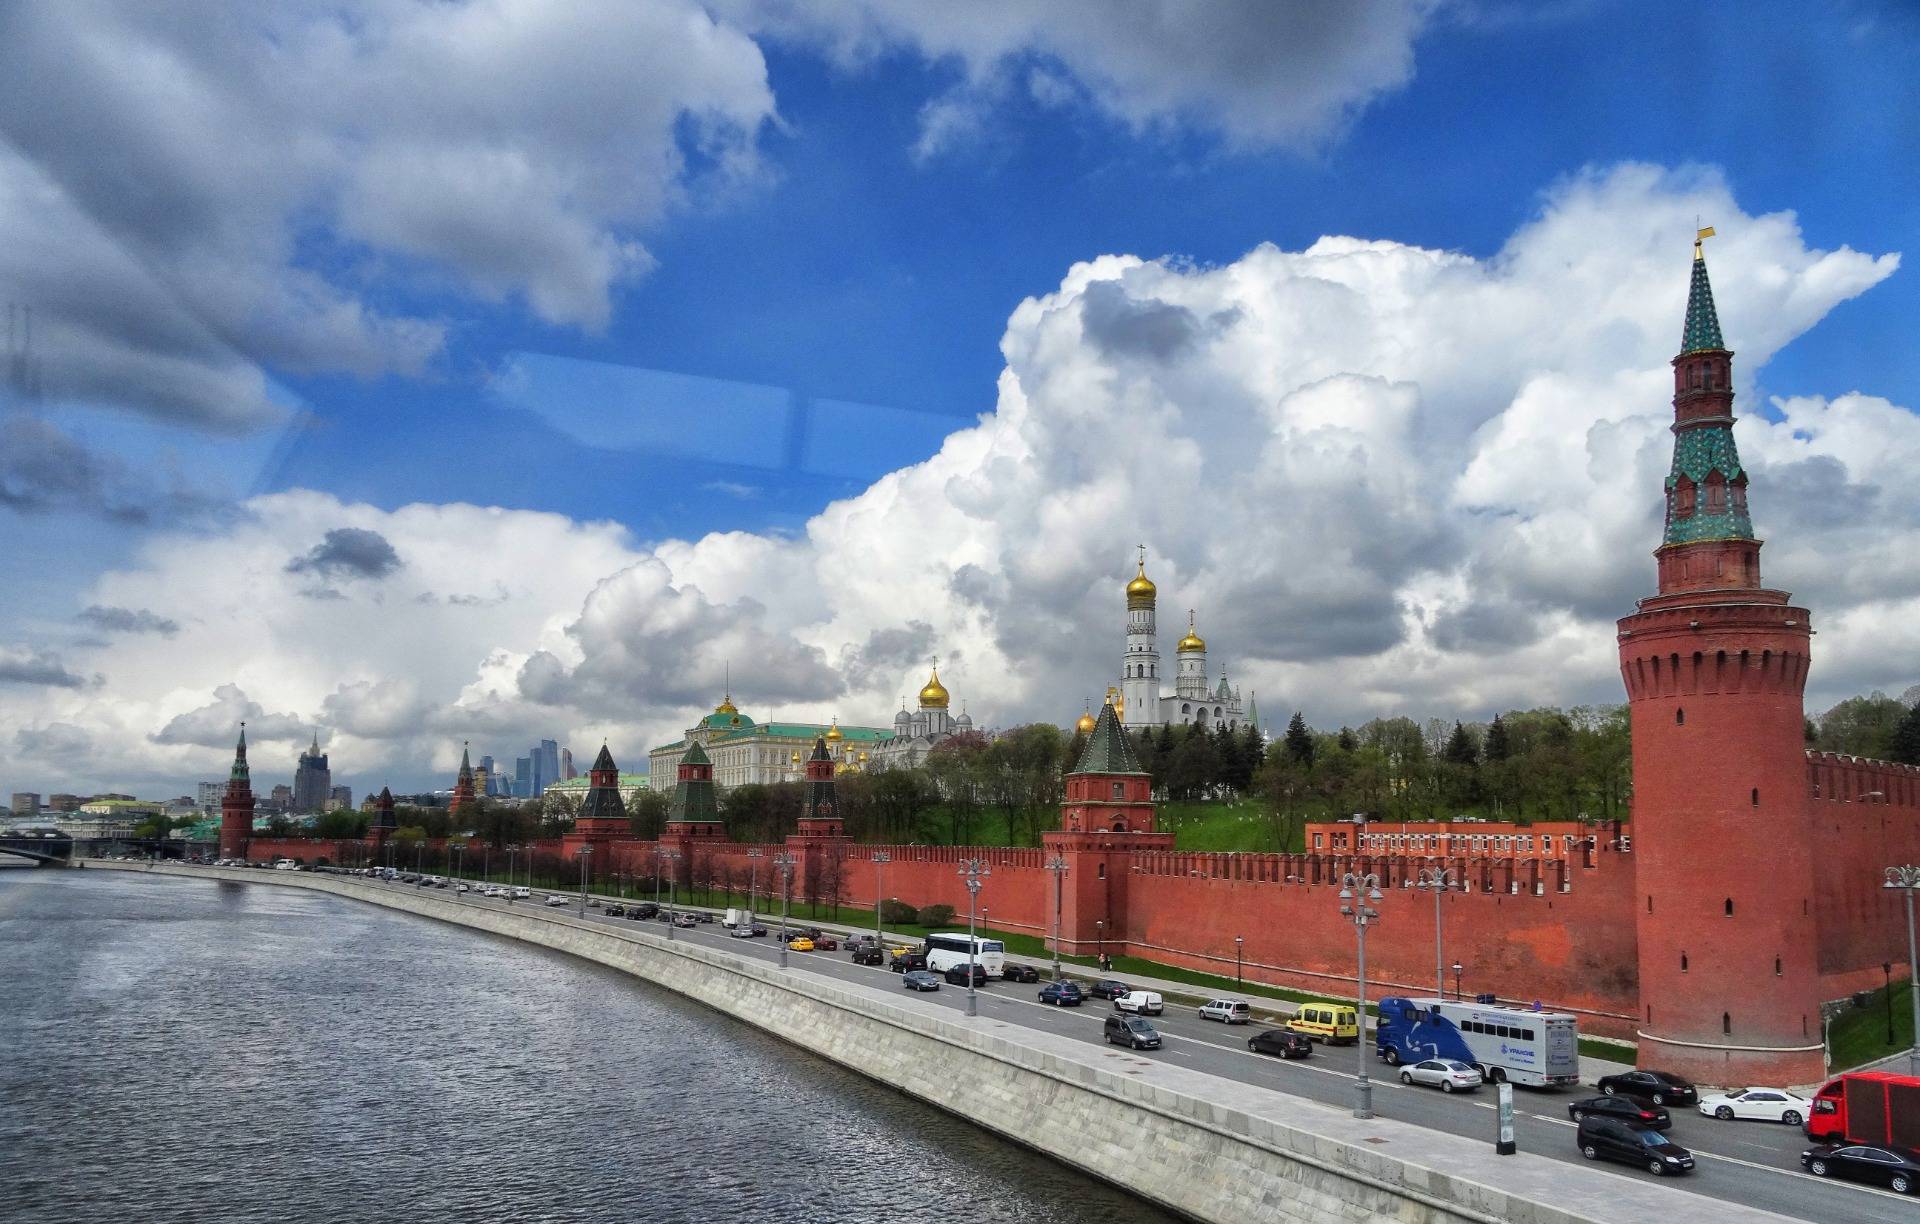 The Kremlin with the river Moskwa